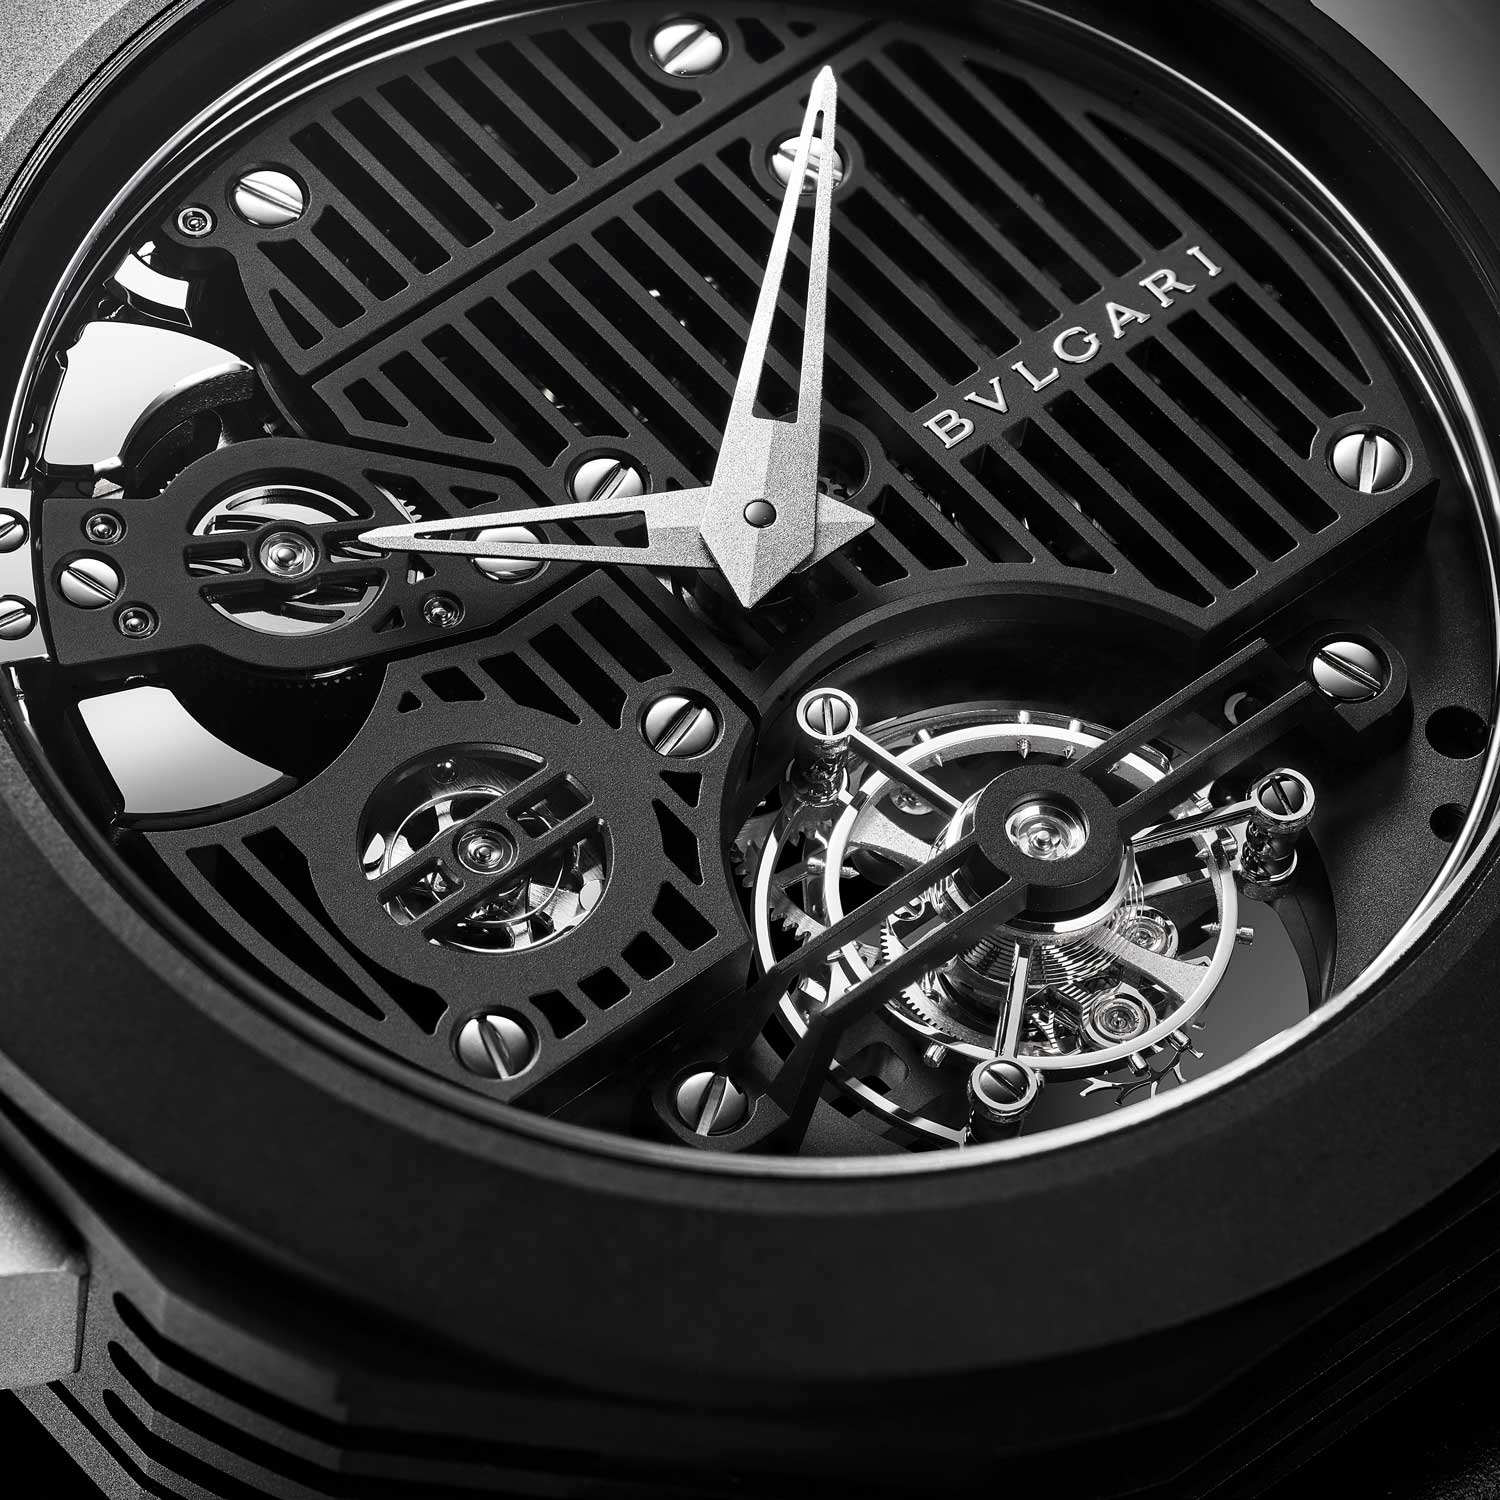 The hammers and gongs of the Octo Roma Carillon Tourbillon, visible on the dial-side along with the tourbillon regulating organ